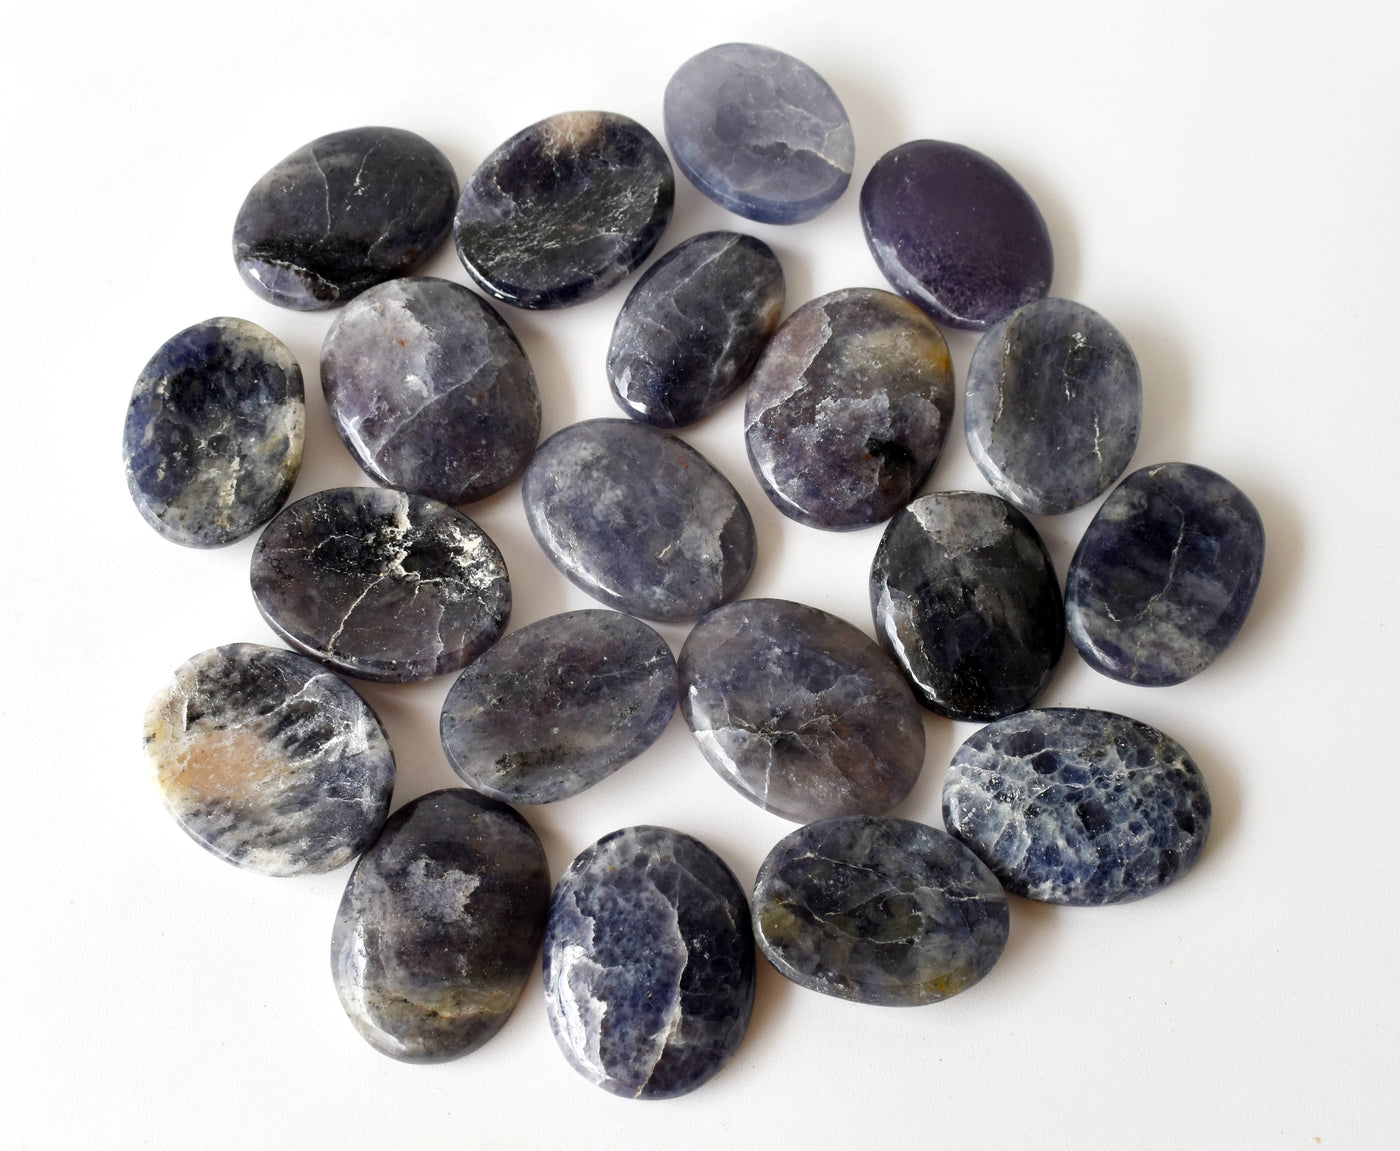 Iolite Pocket Stones (Self- Healing and Communication With Higher Realms)